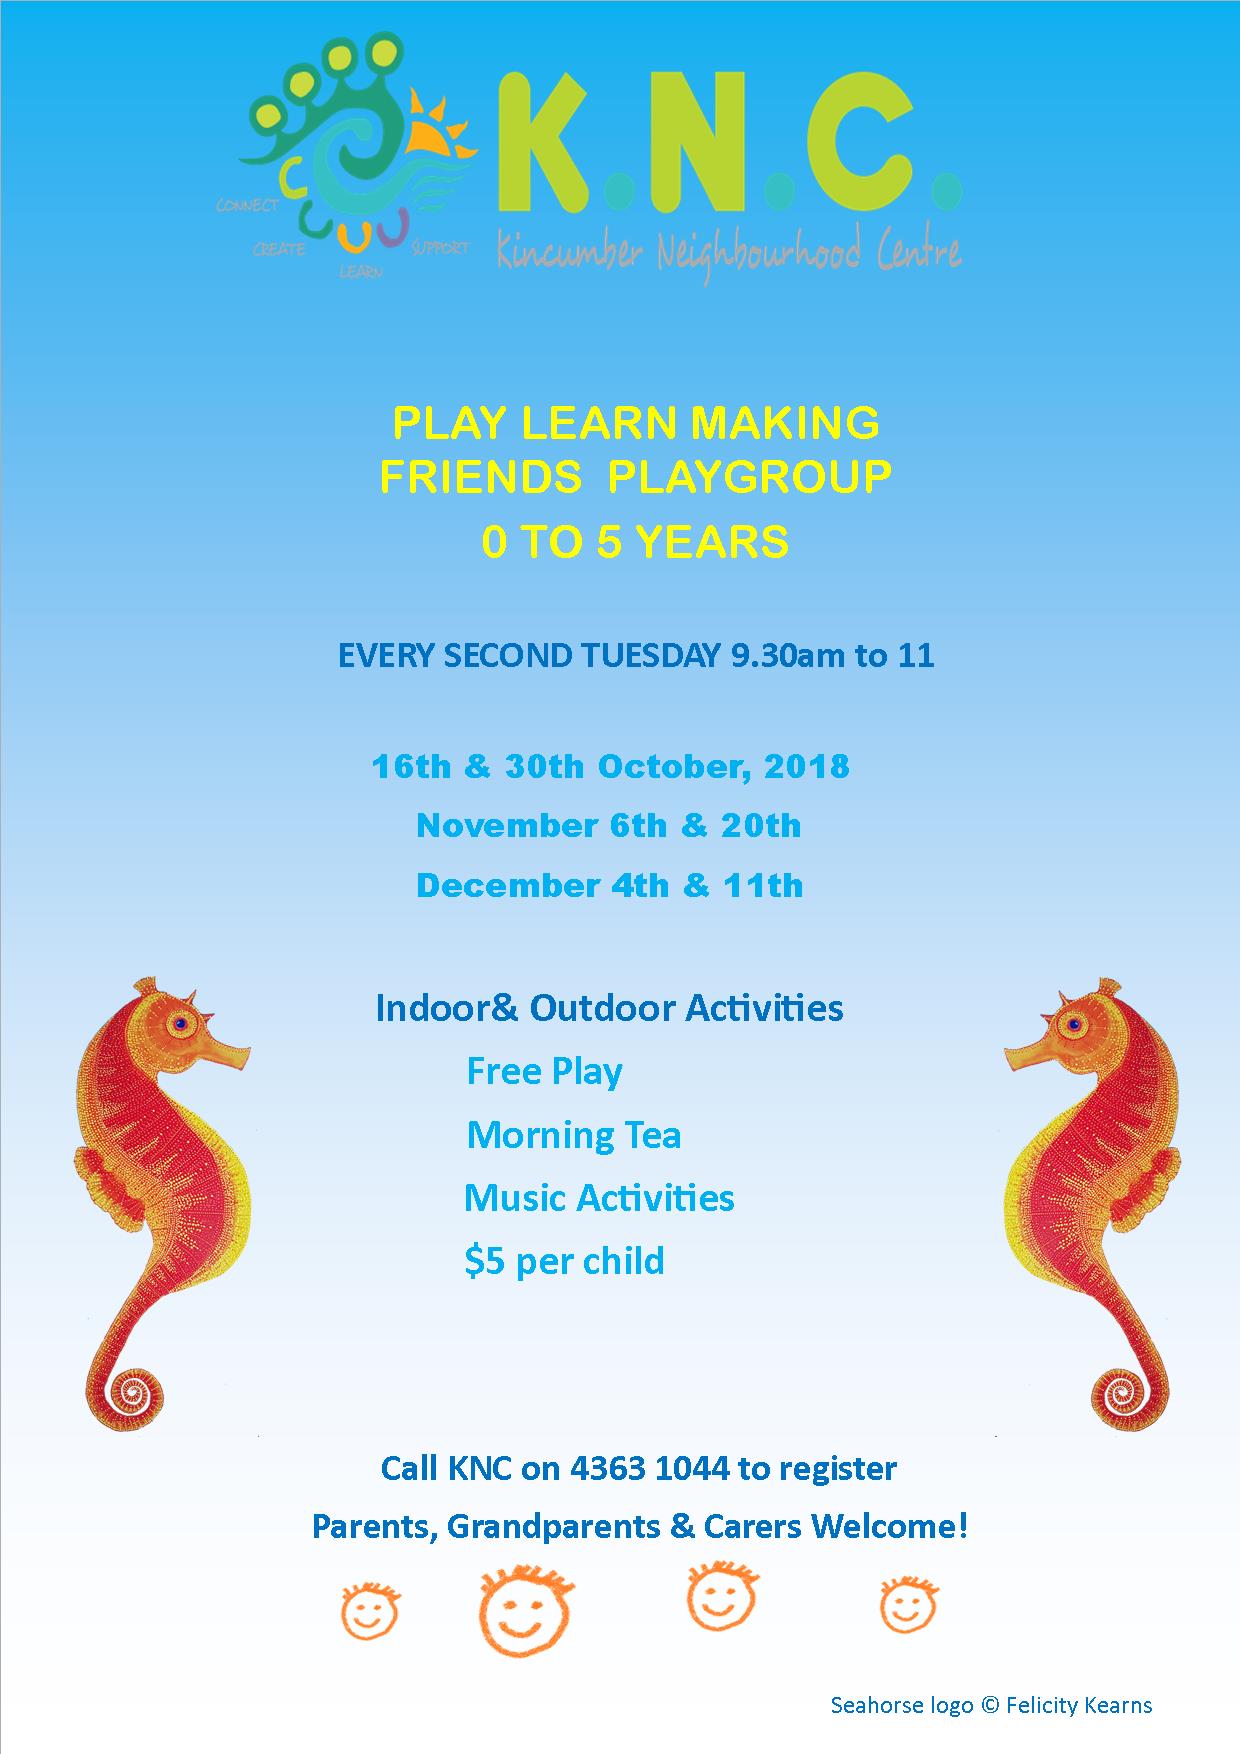 Play Learn Making Friends Playgroup